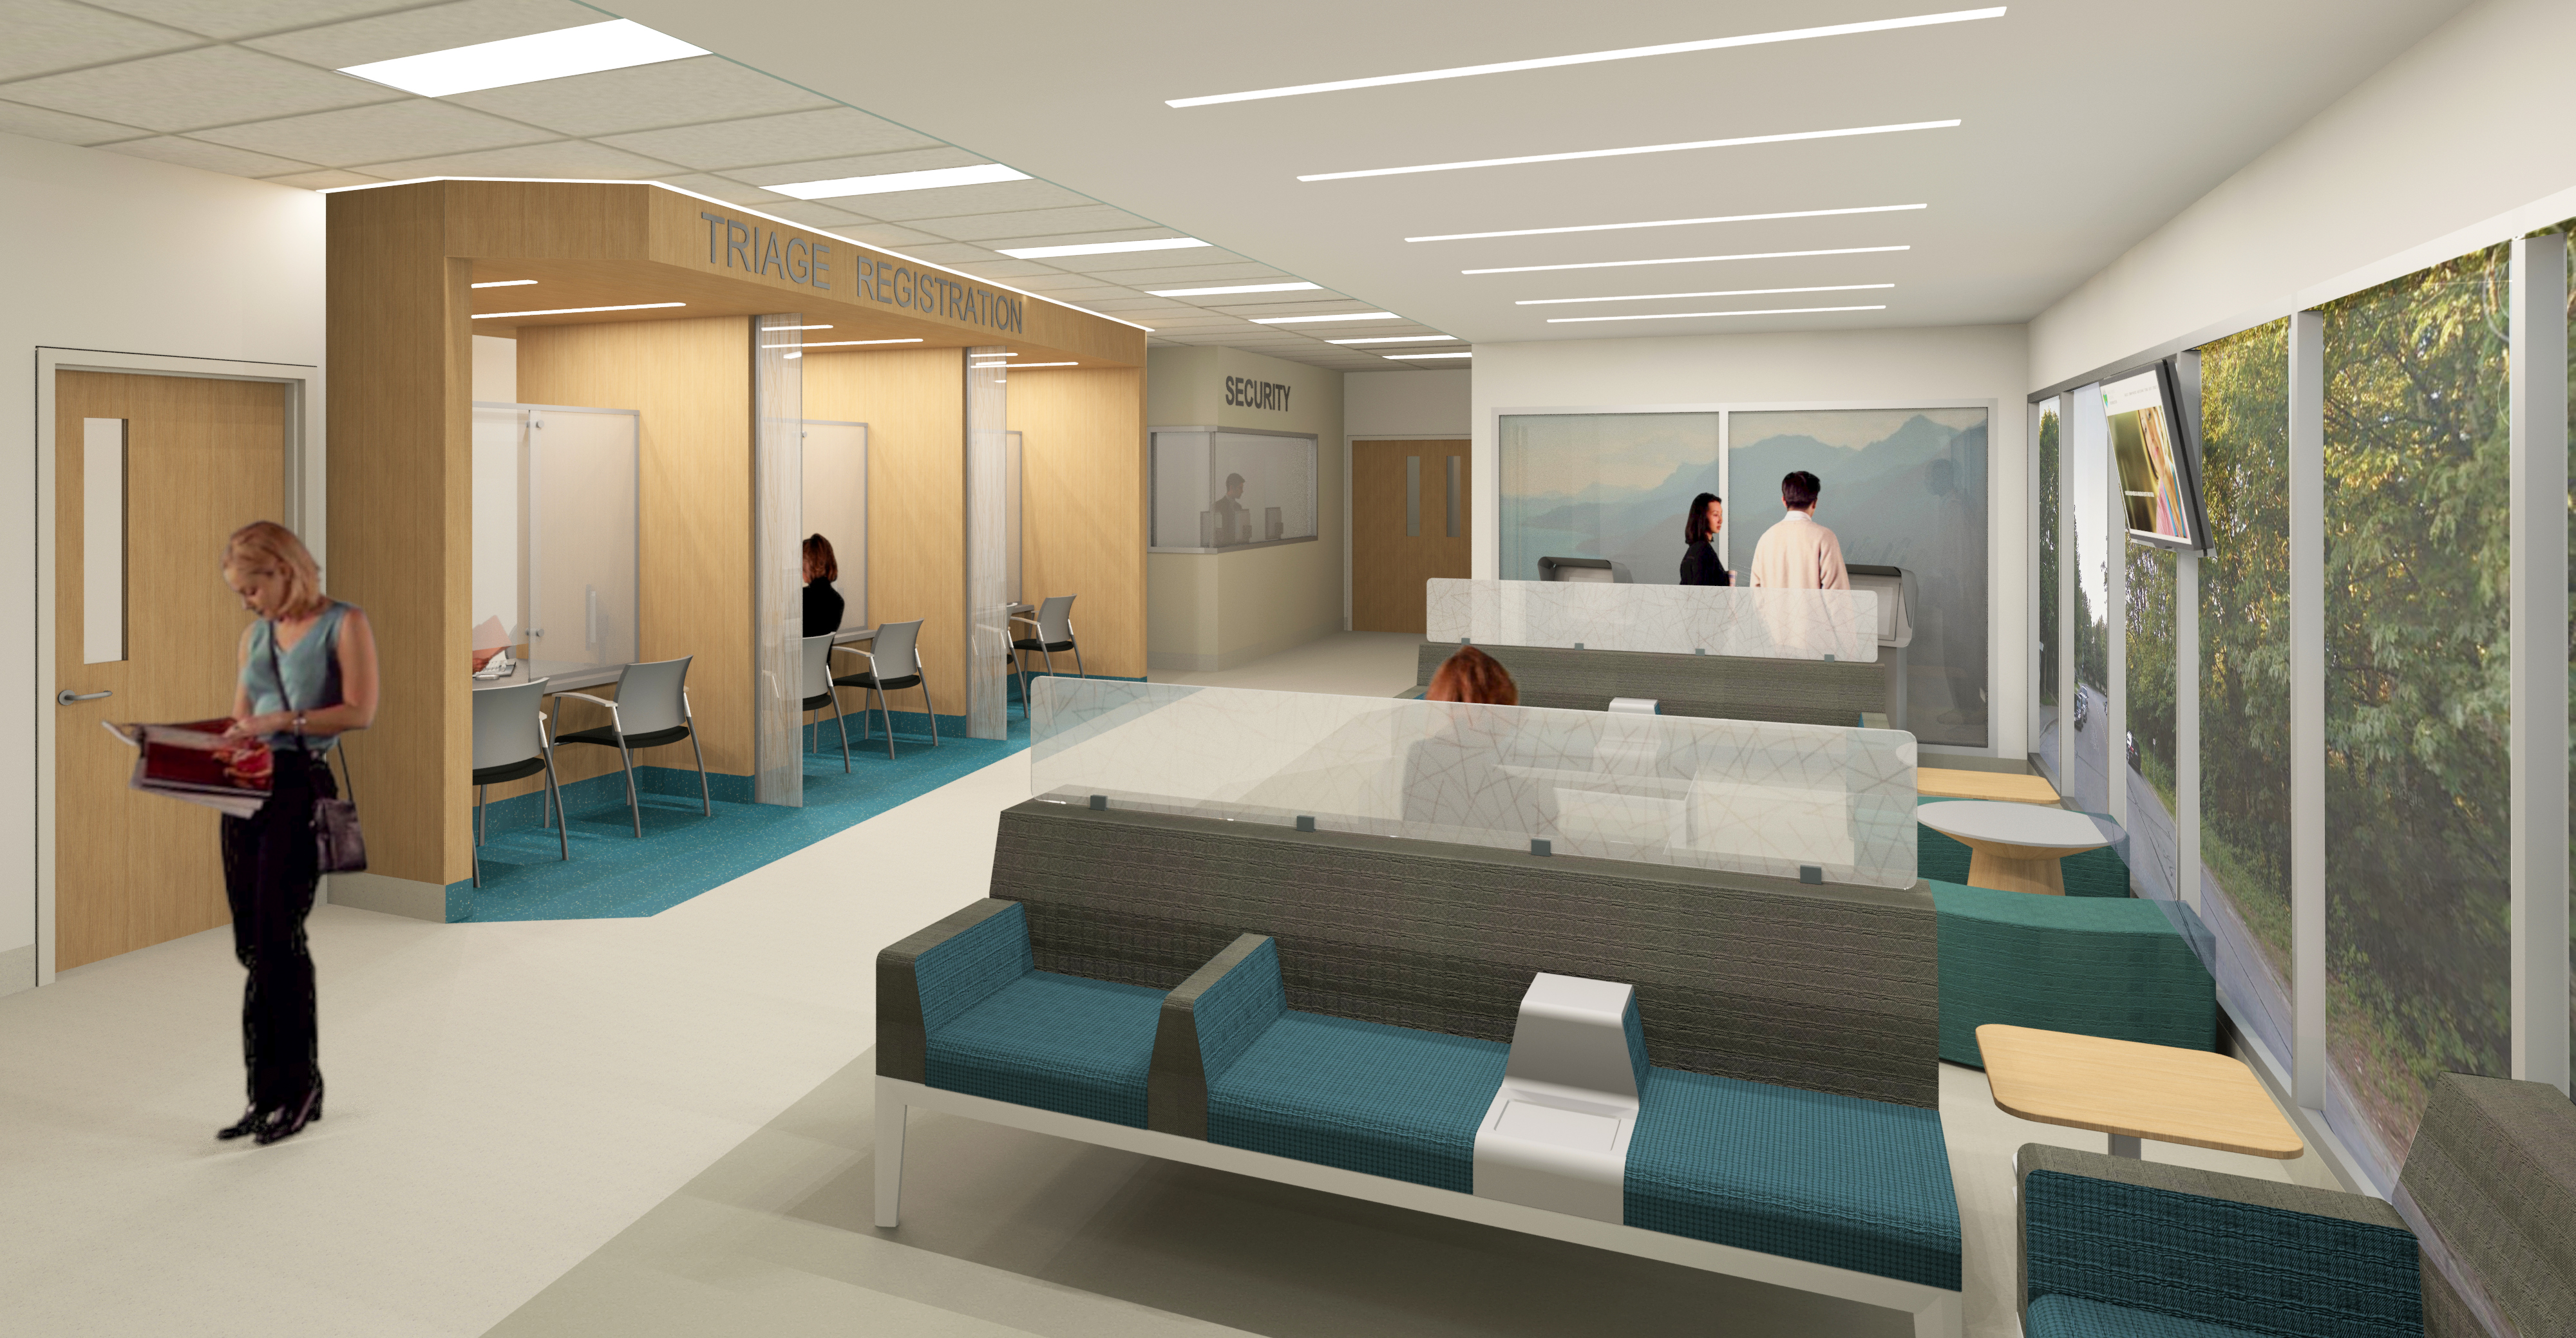 Concept rendering of new Eagle Ridge emergency department registration area. Designs may be subject to change. 